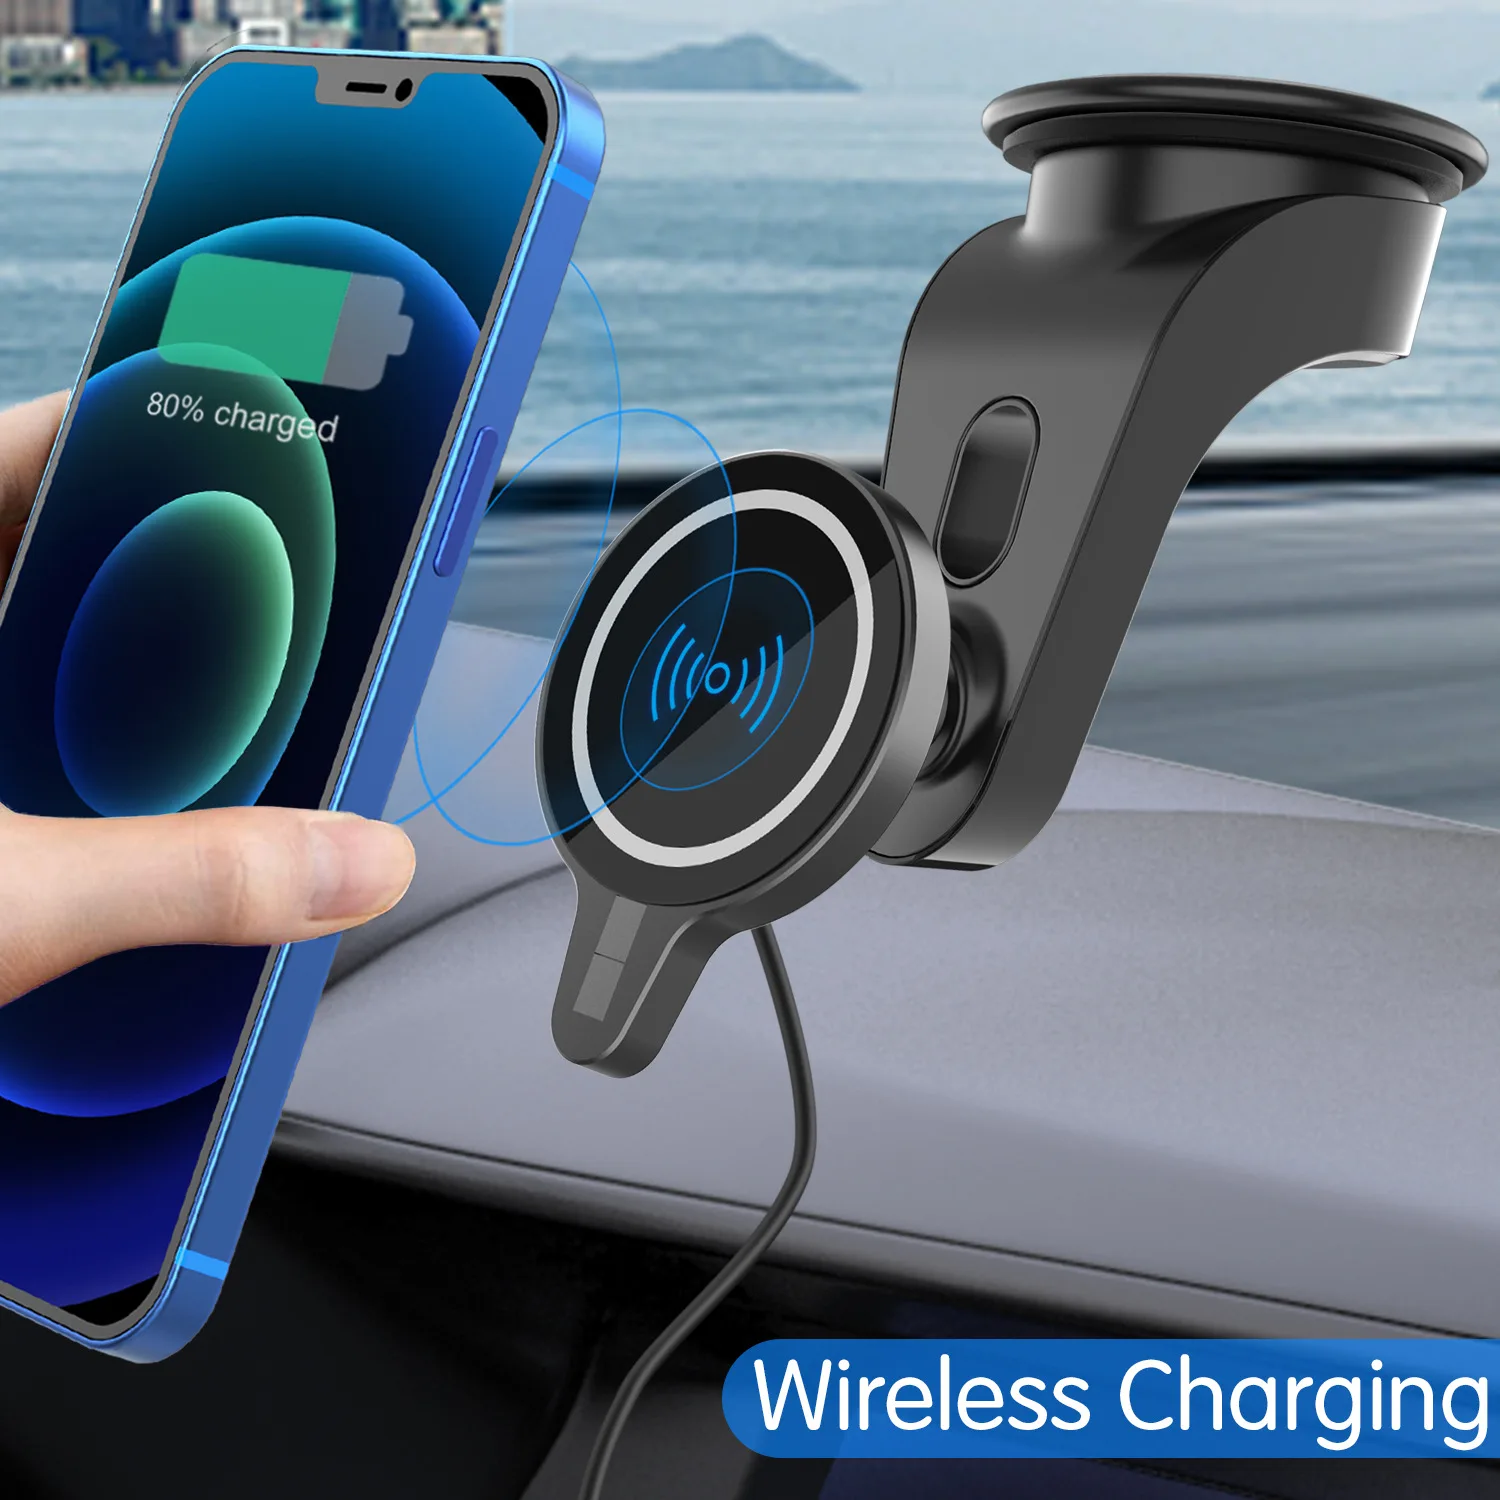 

New Car Magnetic Wireless Charger Dashborad Windshield Suction Cup Fast Charging Bracket Phone Holder